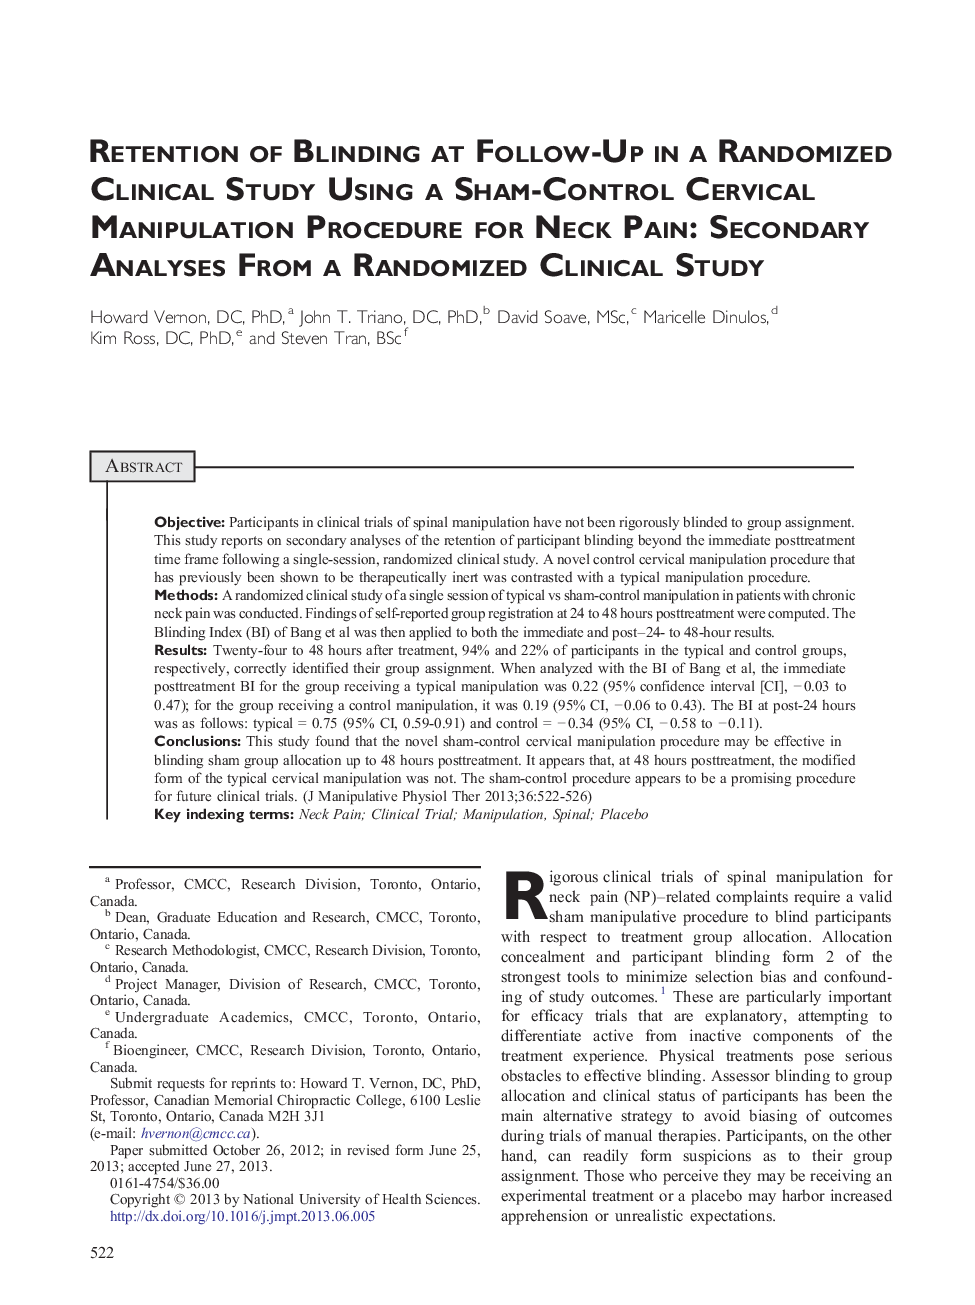 Retention of Blinding at Follow-Up in a Randomized Clinical Study Using a Sham-Control Cervical Manipulation Procedure for Neck Pain: Secondary Analyses From a Randomized Clinical Study